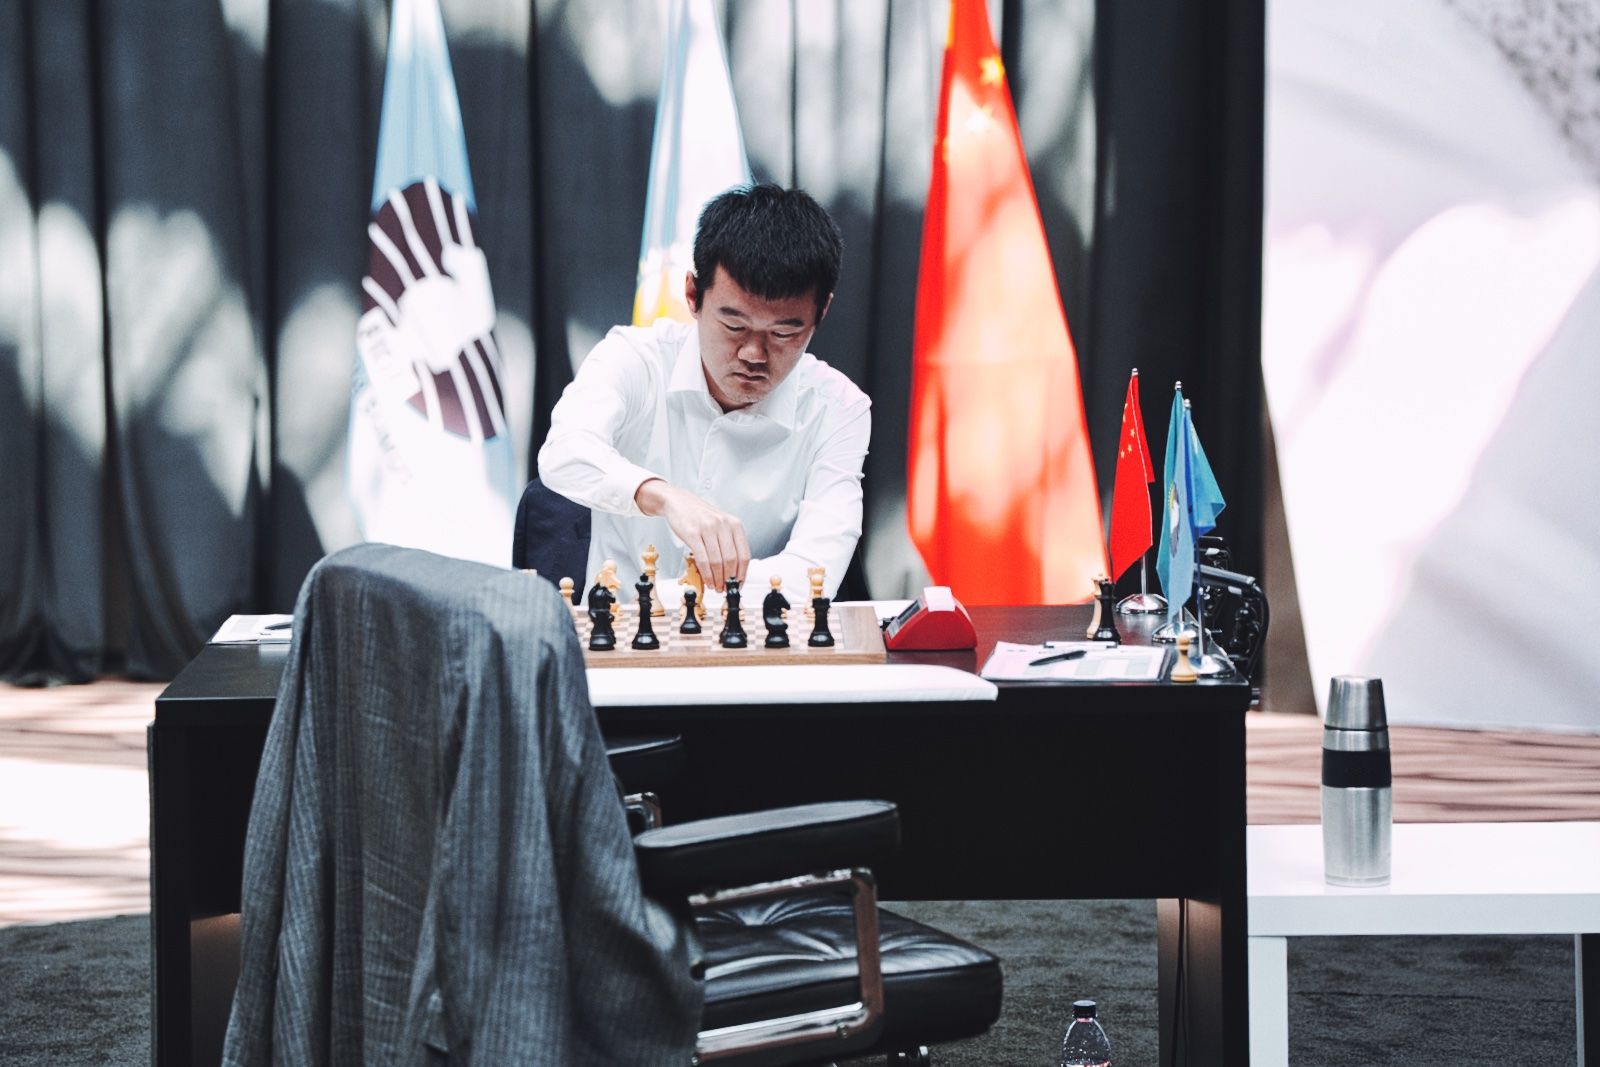 World Chess Championship 2023 Game 12 As It Happened: Ding Liren beats Ian  Nepomniachtchi in game of twists and turns, draws level on points